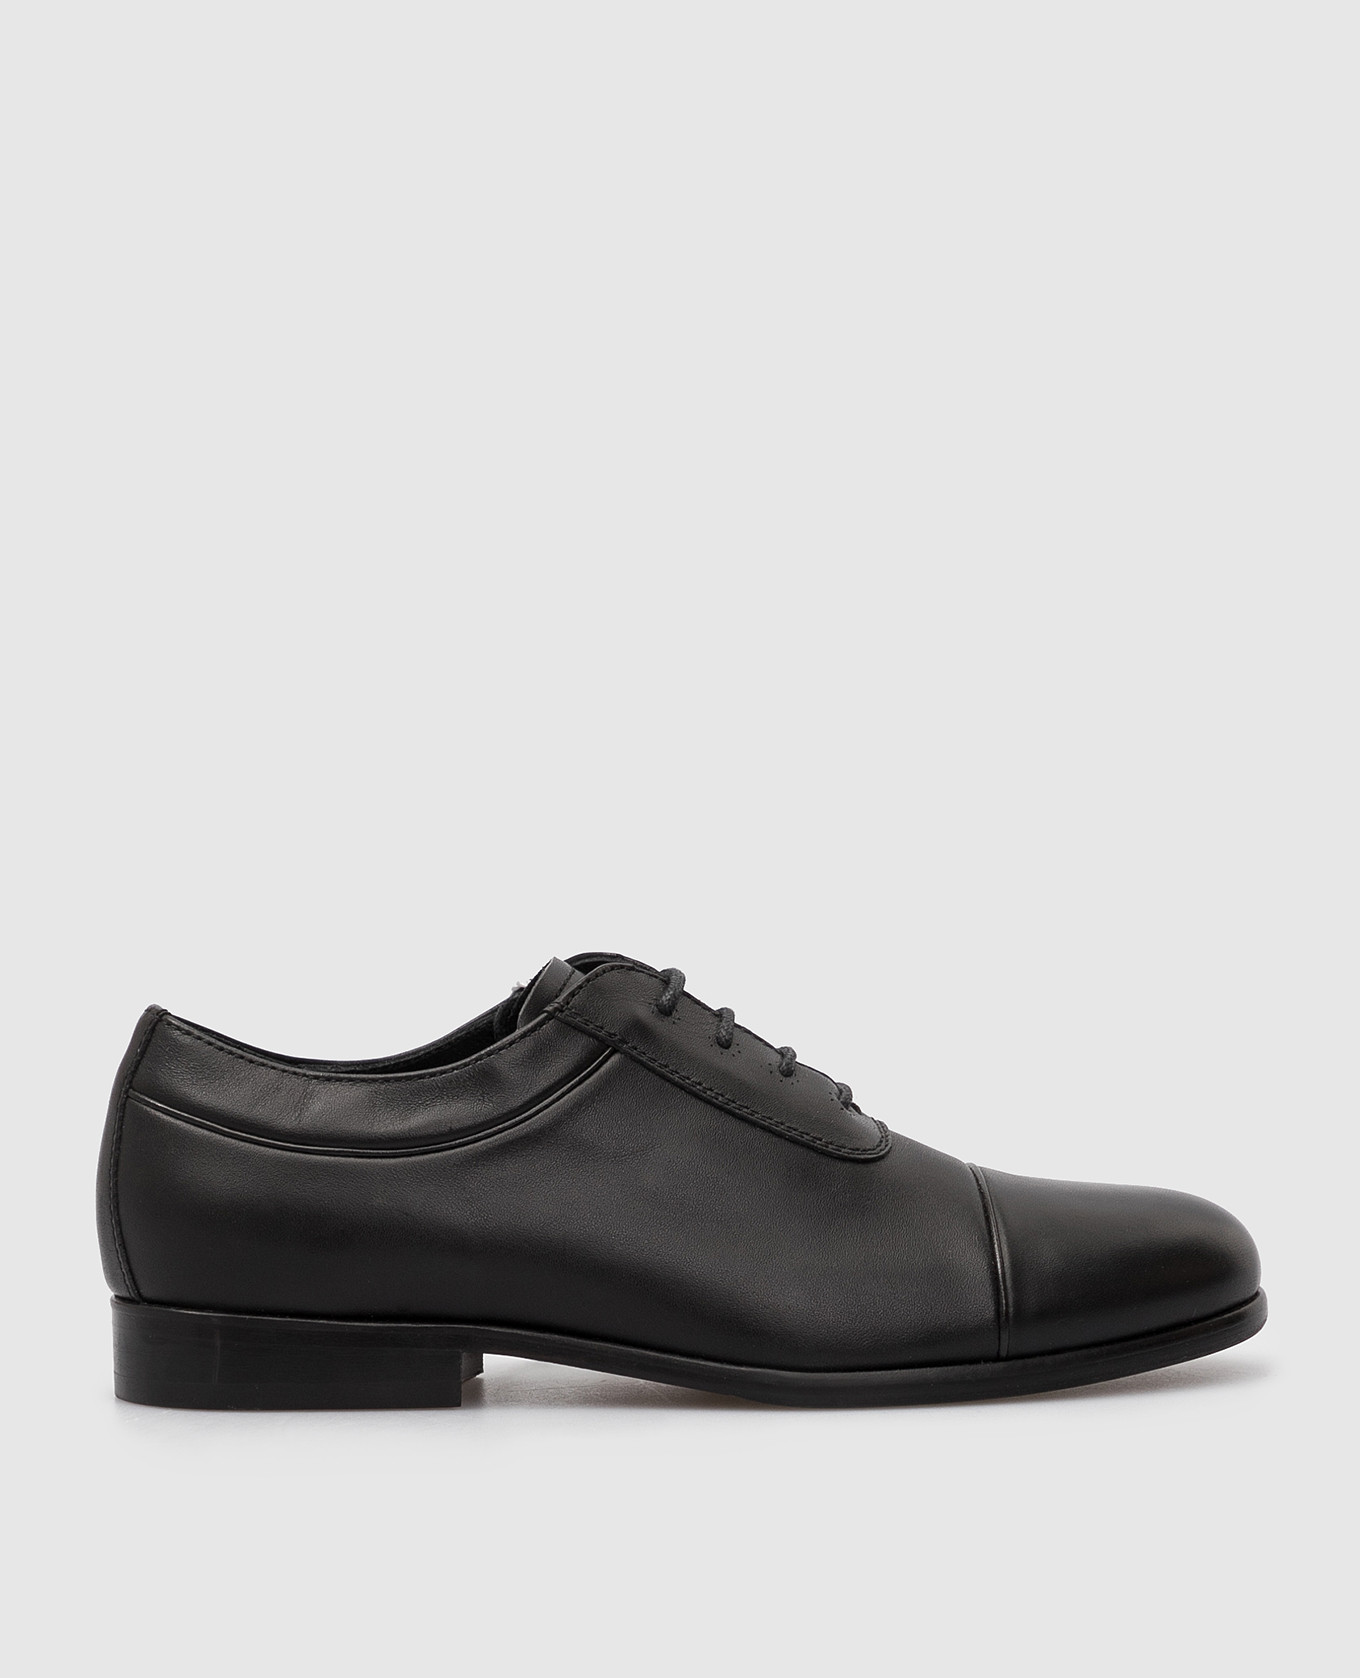 Children's black leather oxford shoes